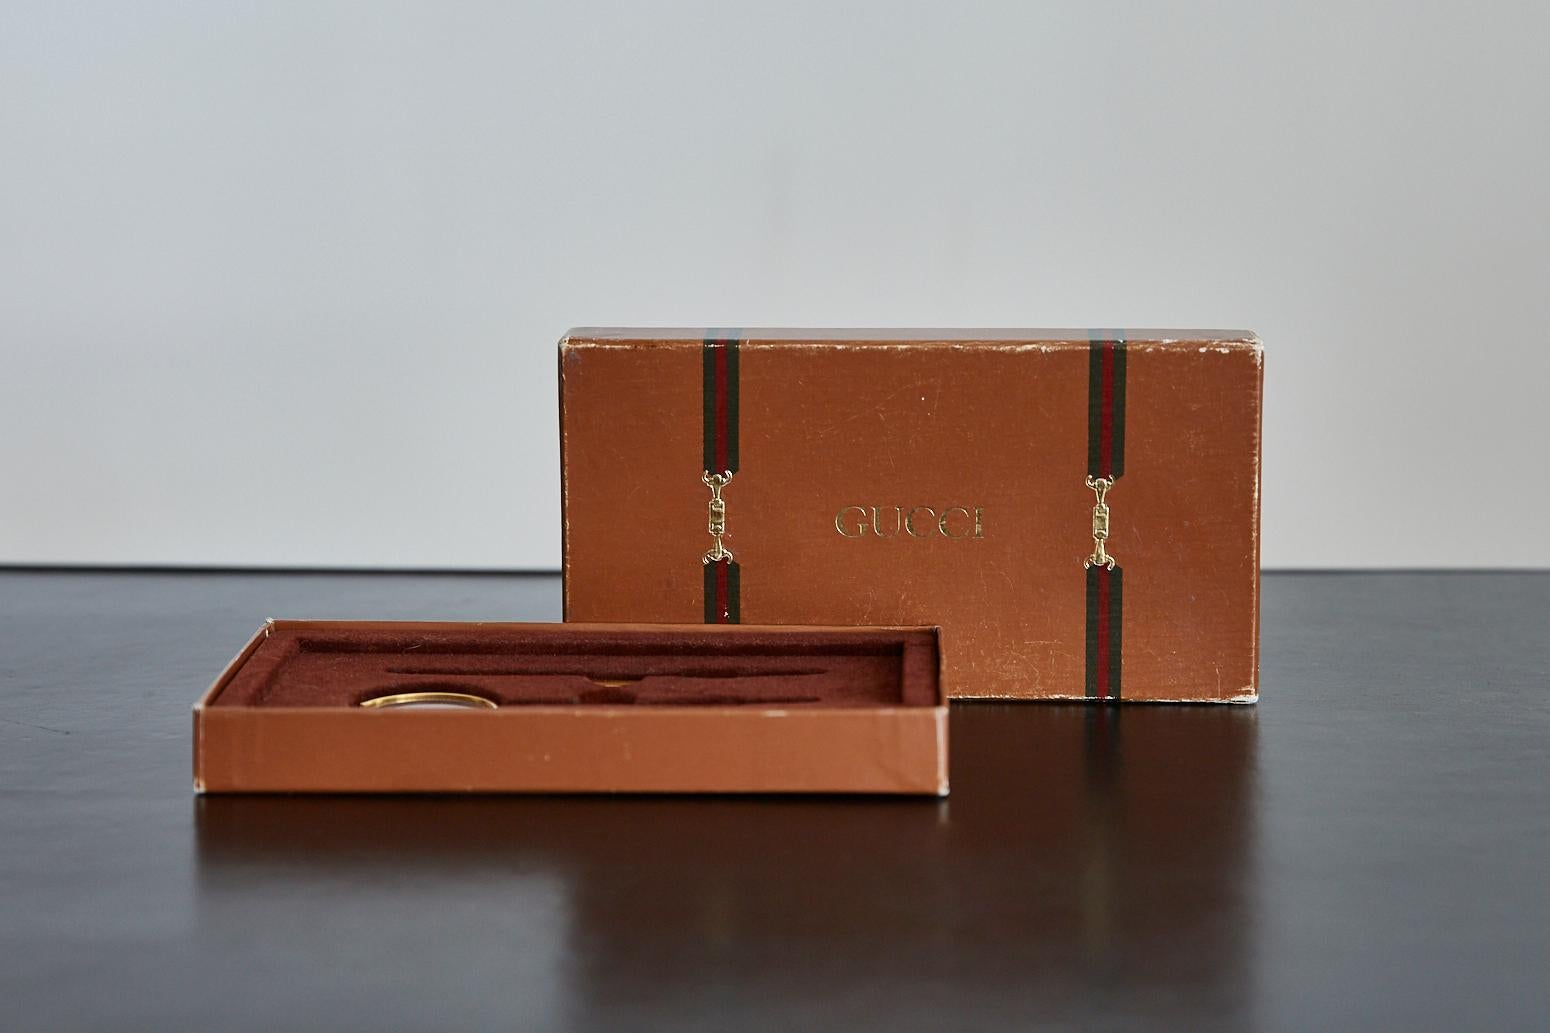 Great vintage Gucci magnifying glass and letter opener set. Made of polished brass in excellent vintage condition. Comes with original box. Great gift idea!